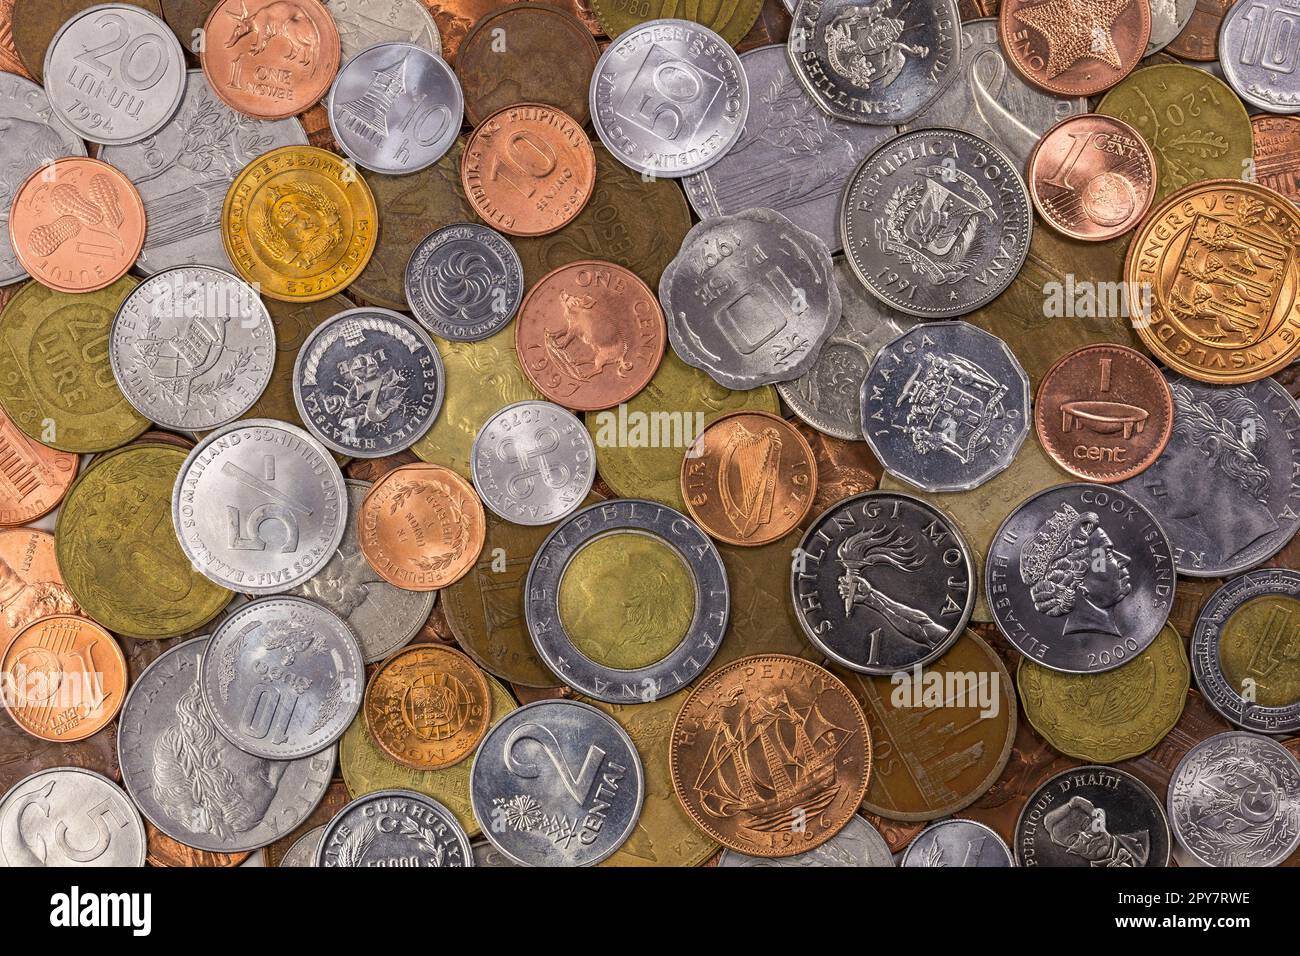 A Collection of Coin Money From Around The World Stock Photo